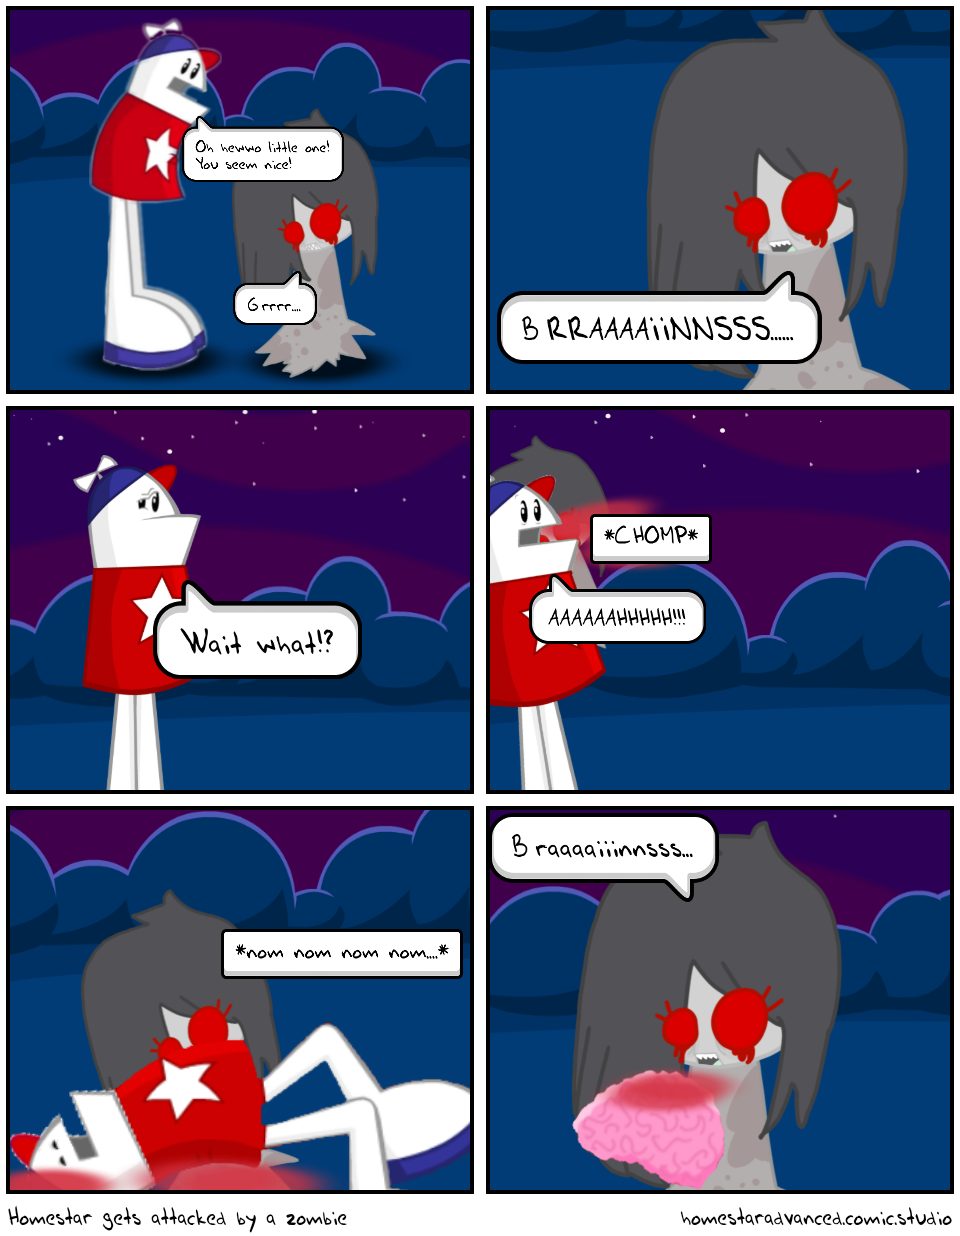 Homestar gets attacked by a zombie